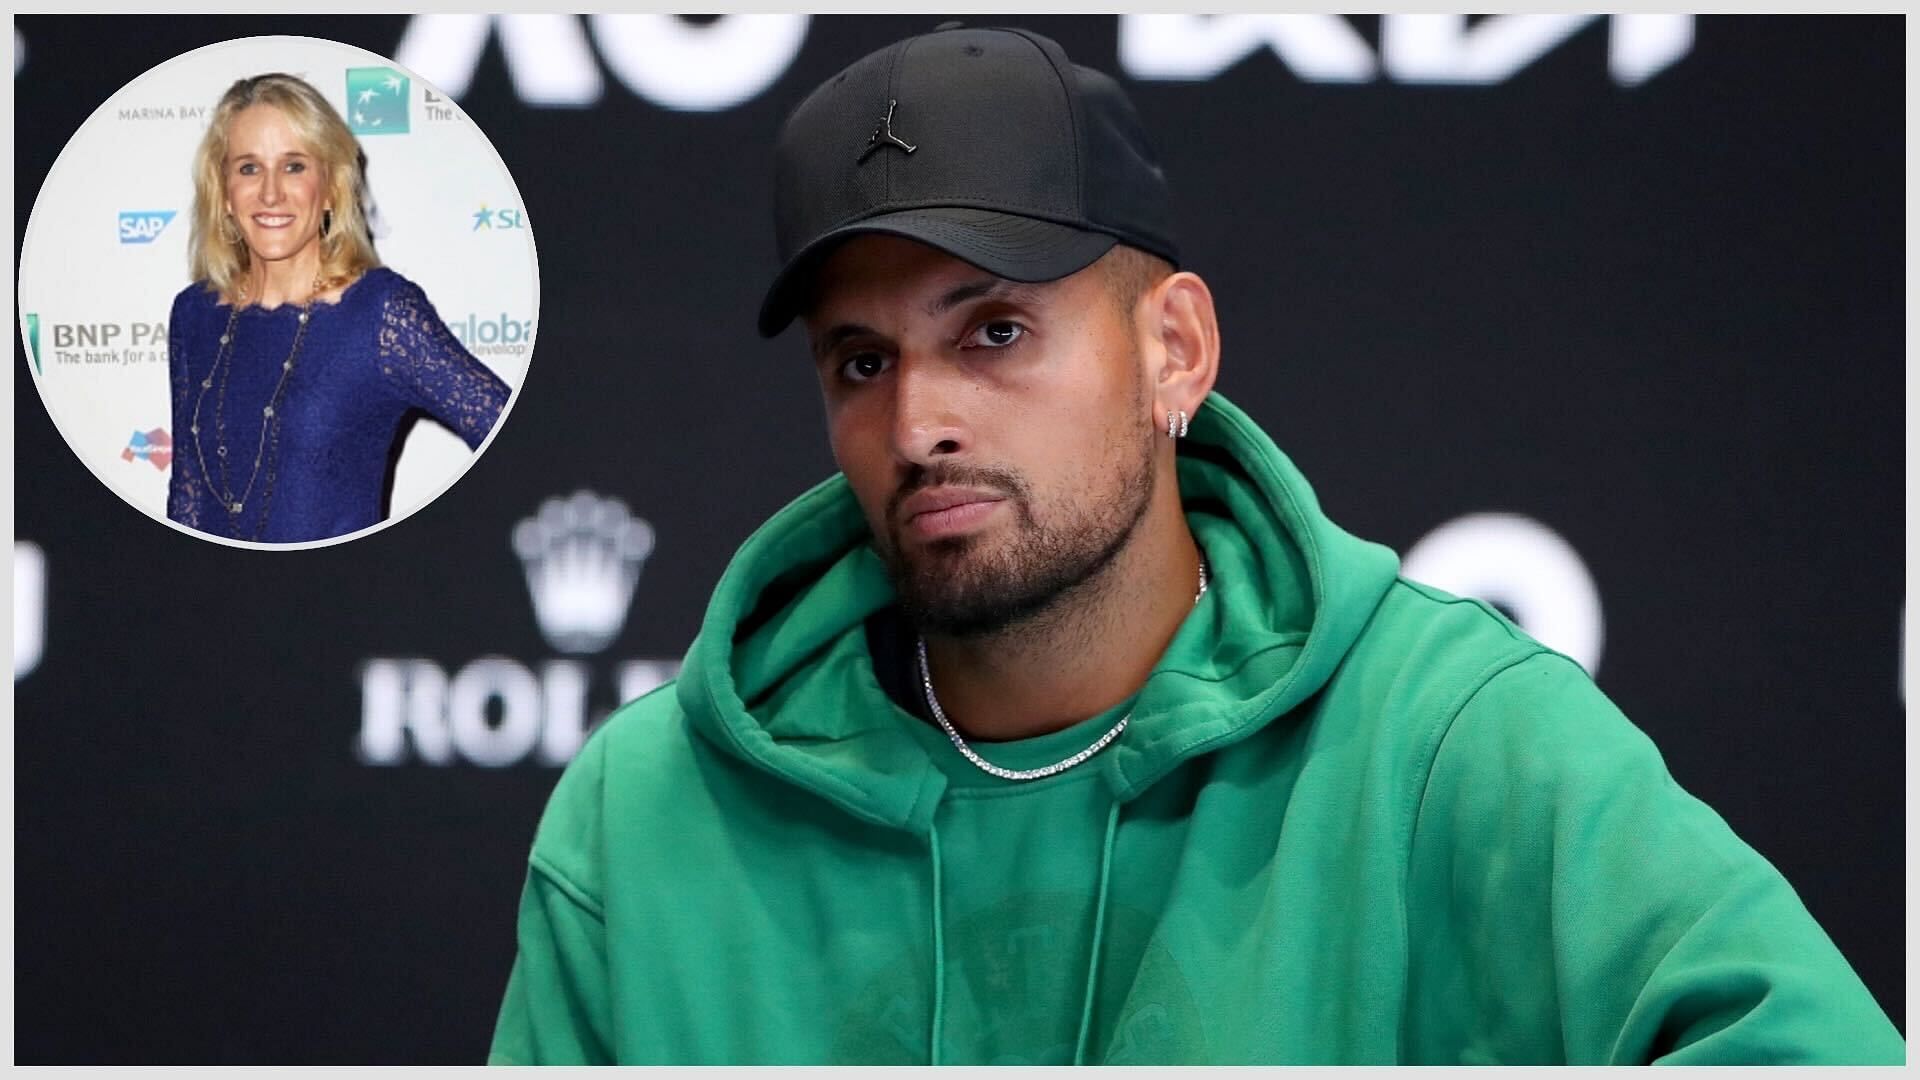 Tracy Austin has expressed her disappointment at Nick Kyrgios